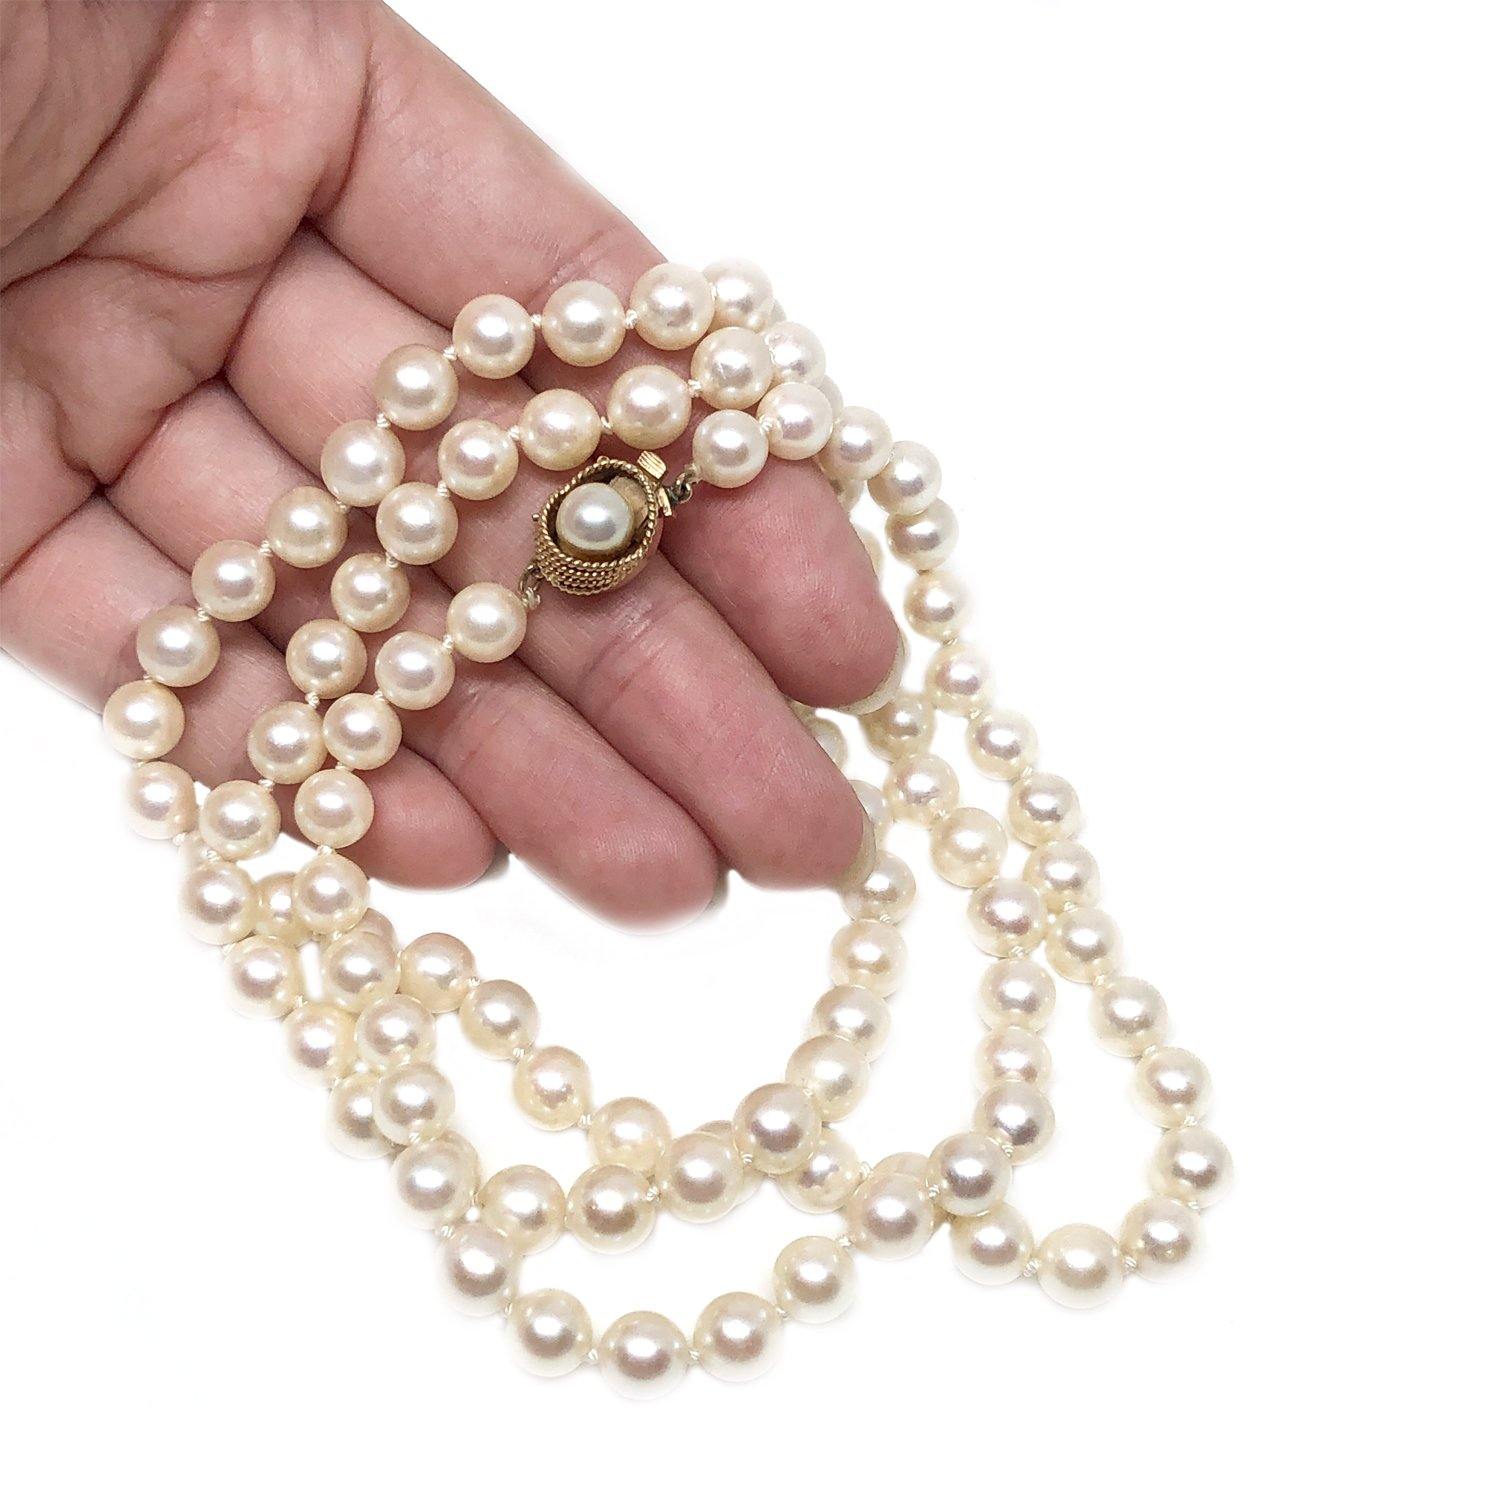 Braided Japanese Saltwater Cultured Akoya Pearl Strand - 14K Yellow Gold 31 Inch - Vintage Valuable Pearls